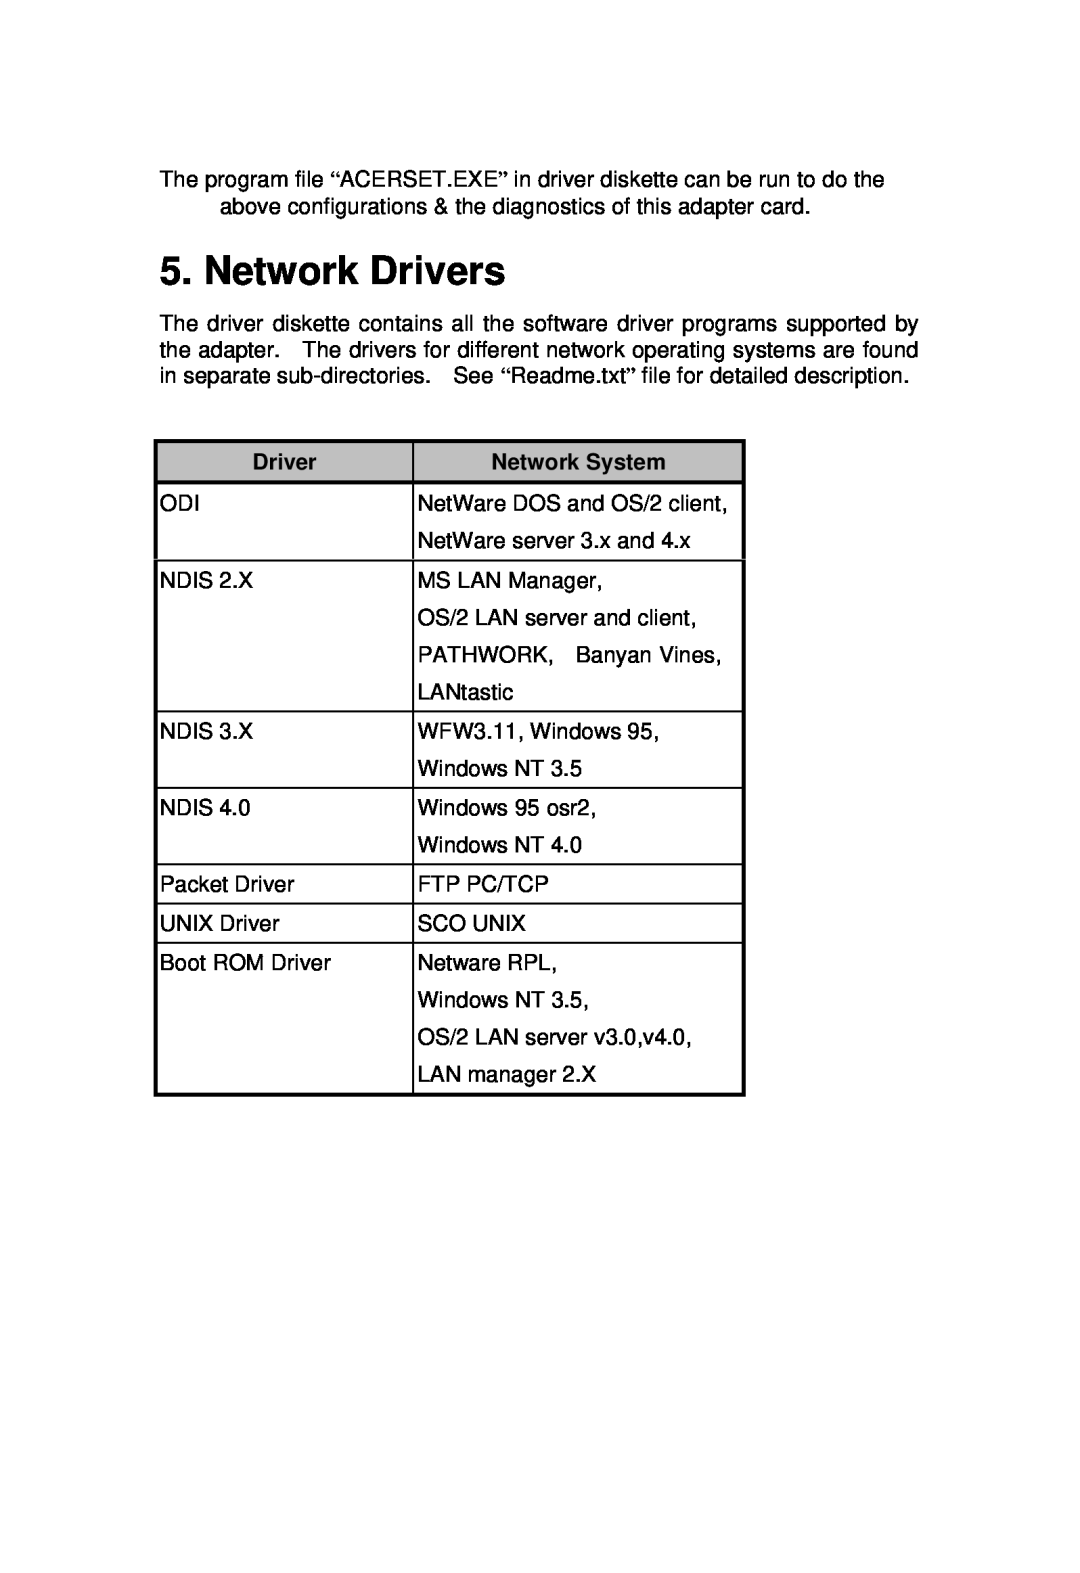 Acer ALN-201 manual Network Drivers, Network System 